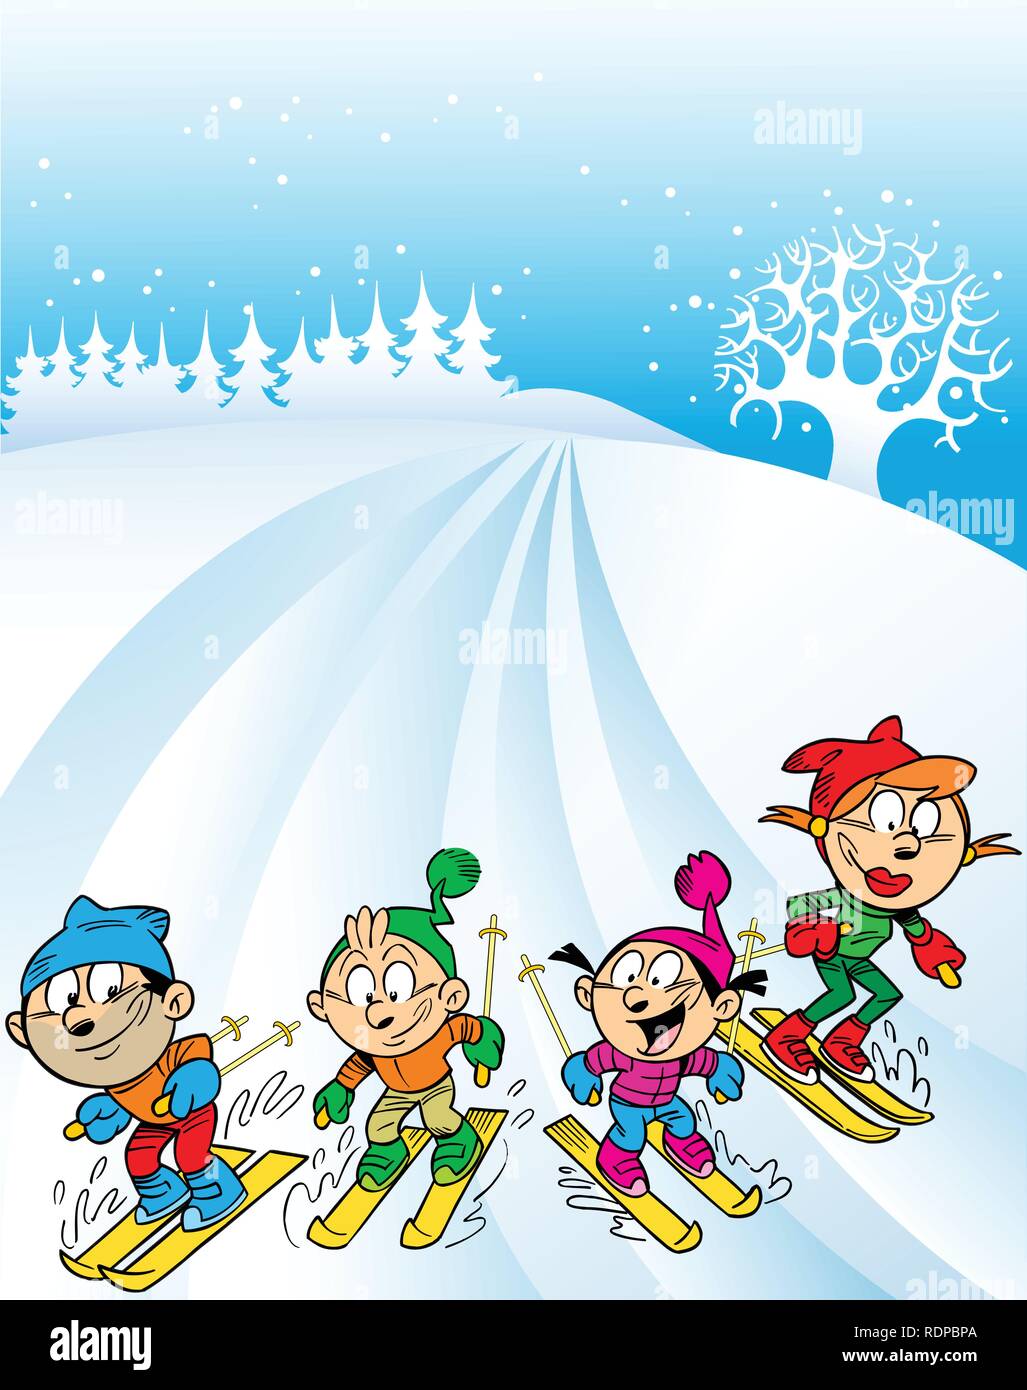 The illustration shows a family ski trip. Children with parents to ski the mountain. Illustration done in cartoon style, on separate layers. Stock Vector